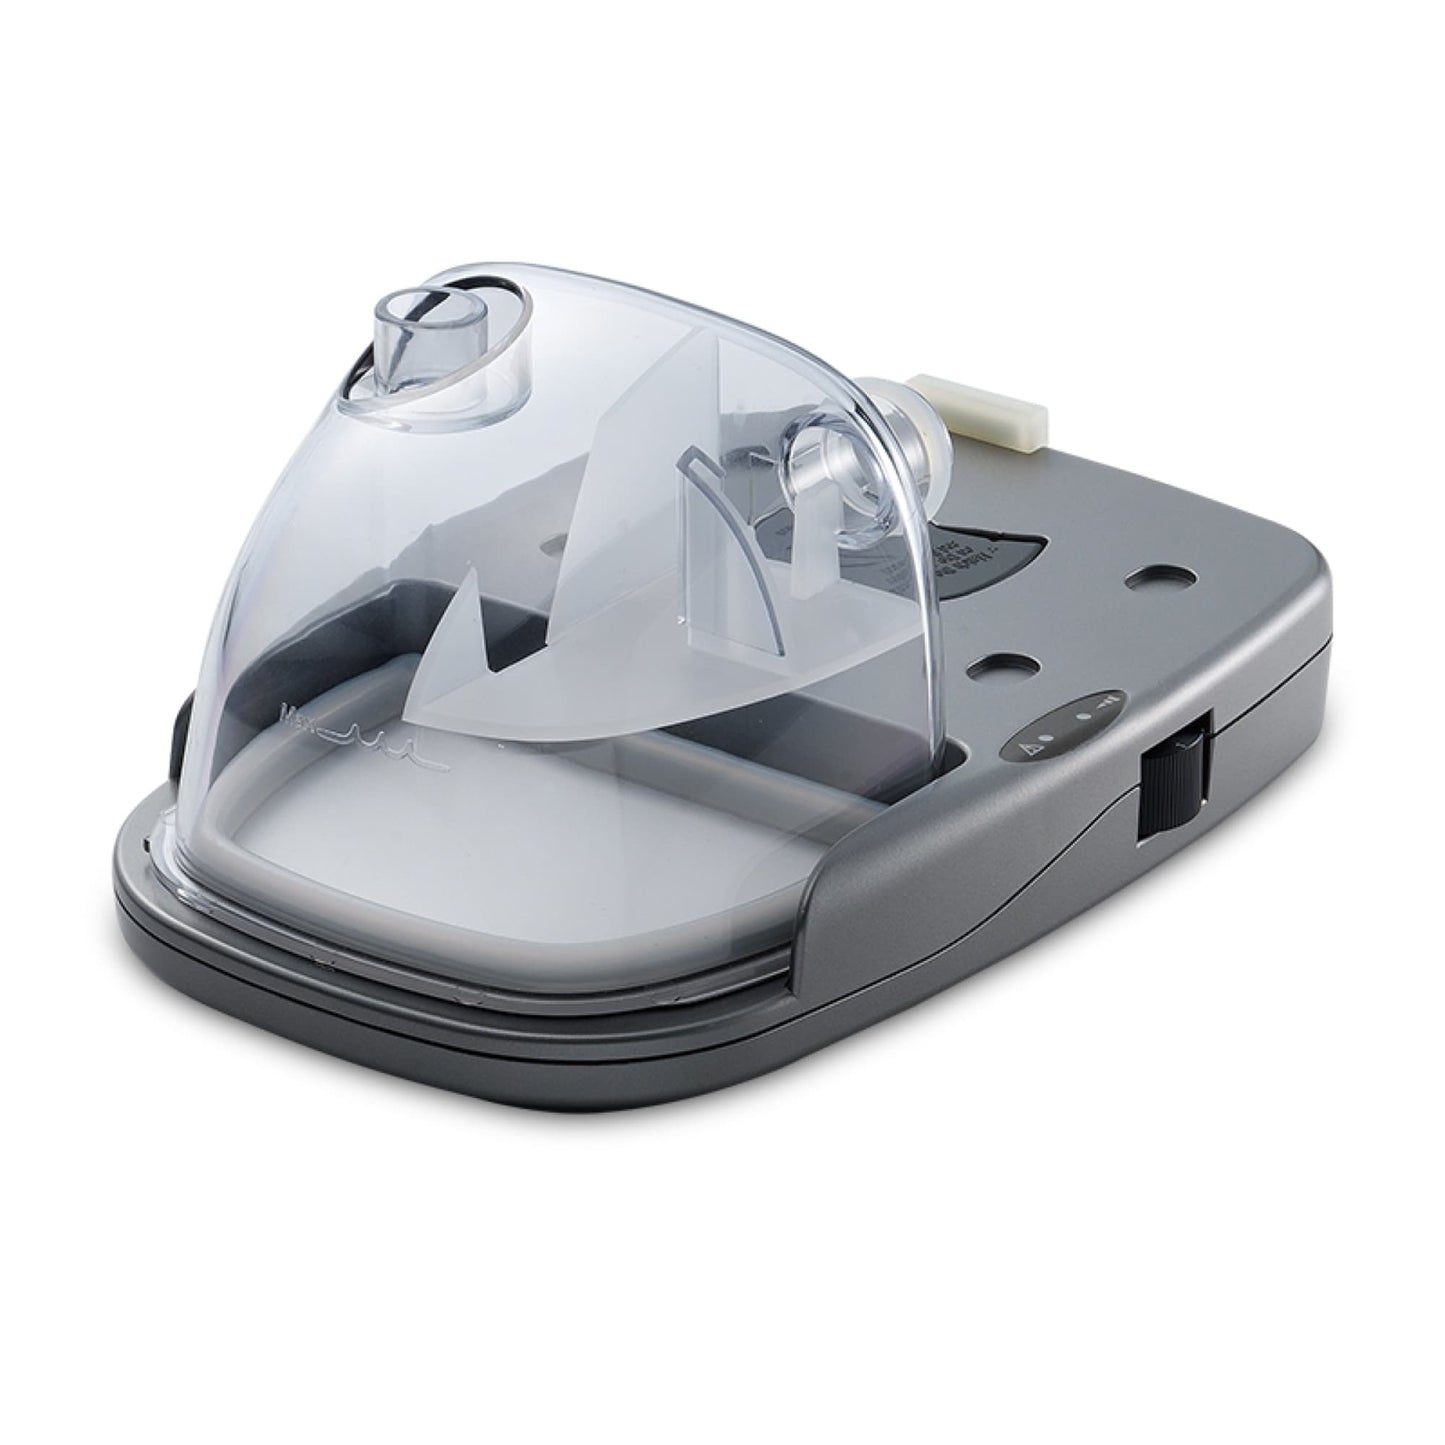 Apex XT APAP - Advanced Auto-adjusting CPAP Therapy Device